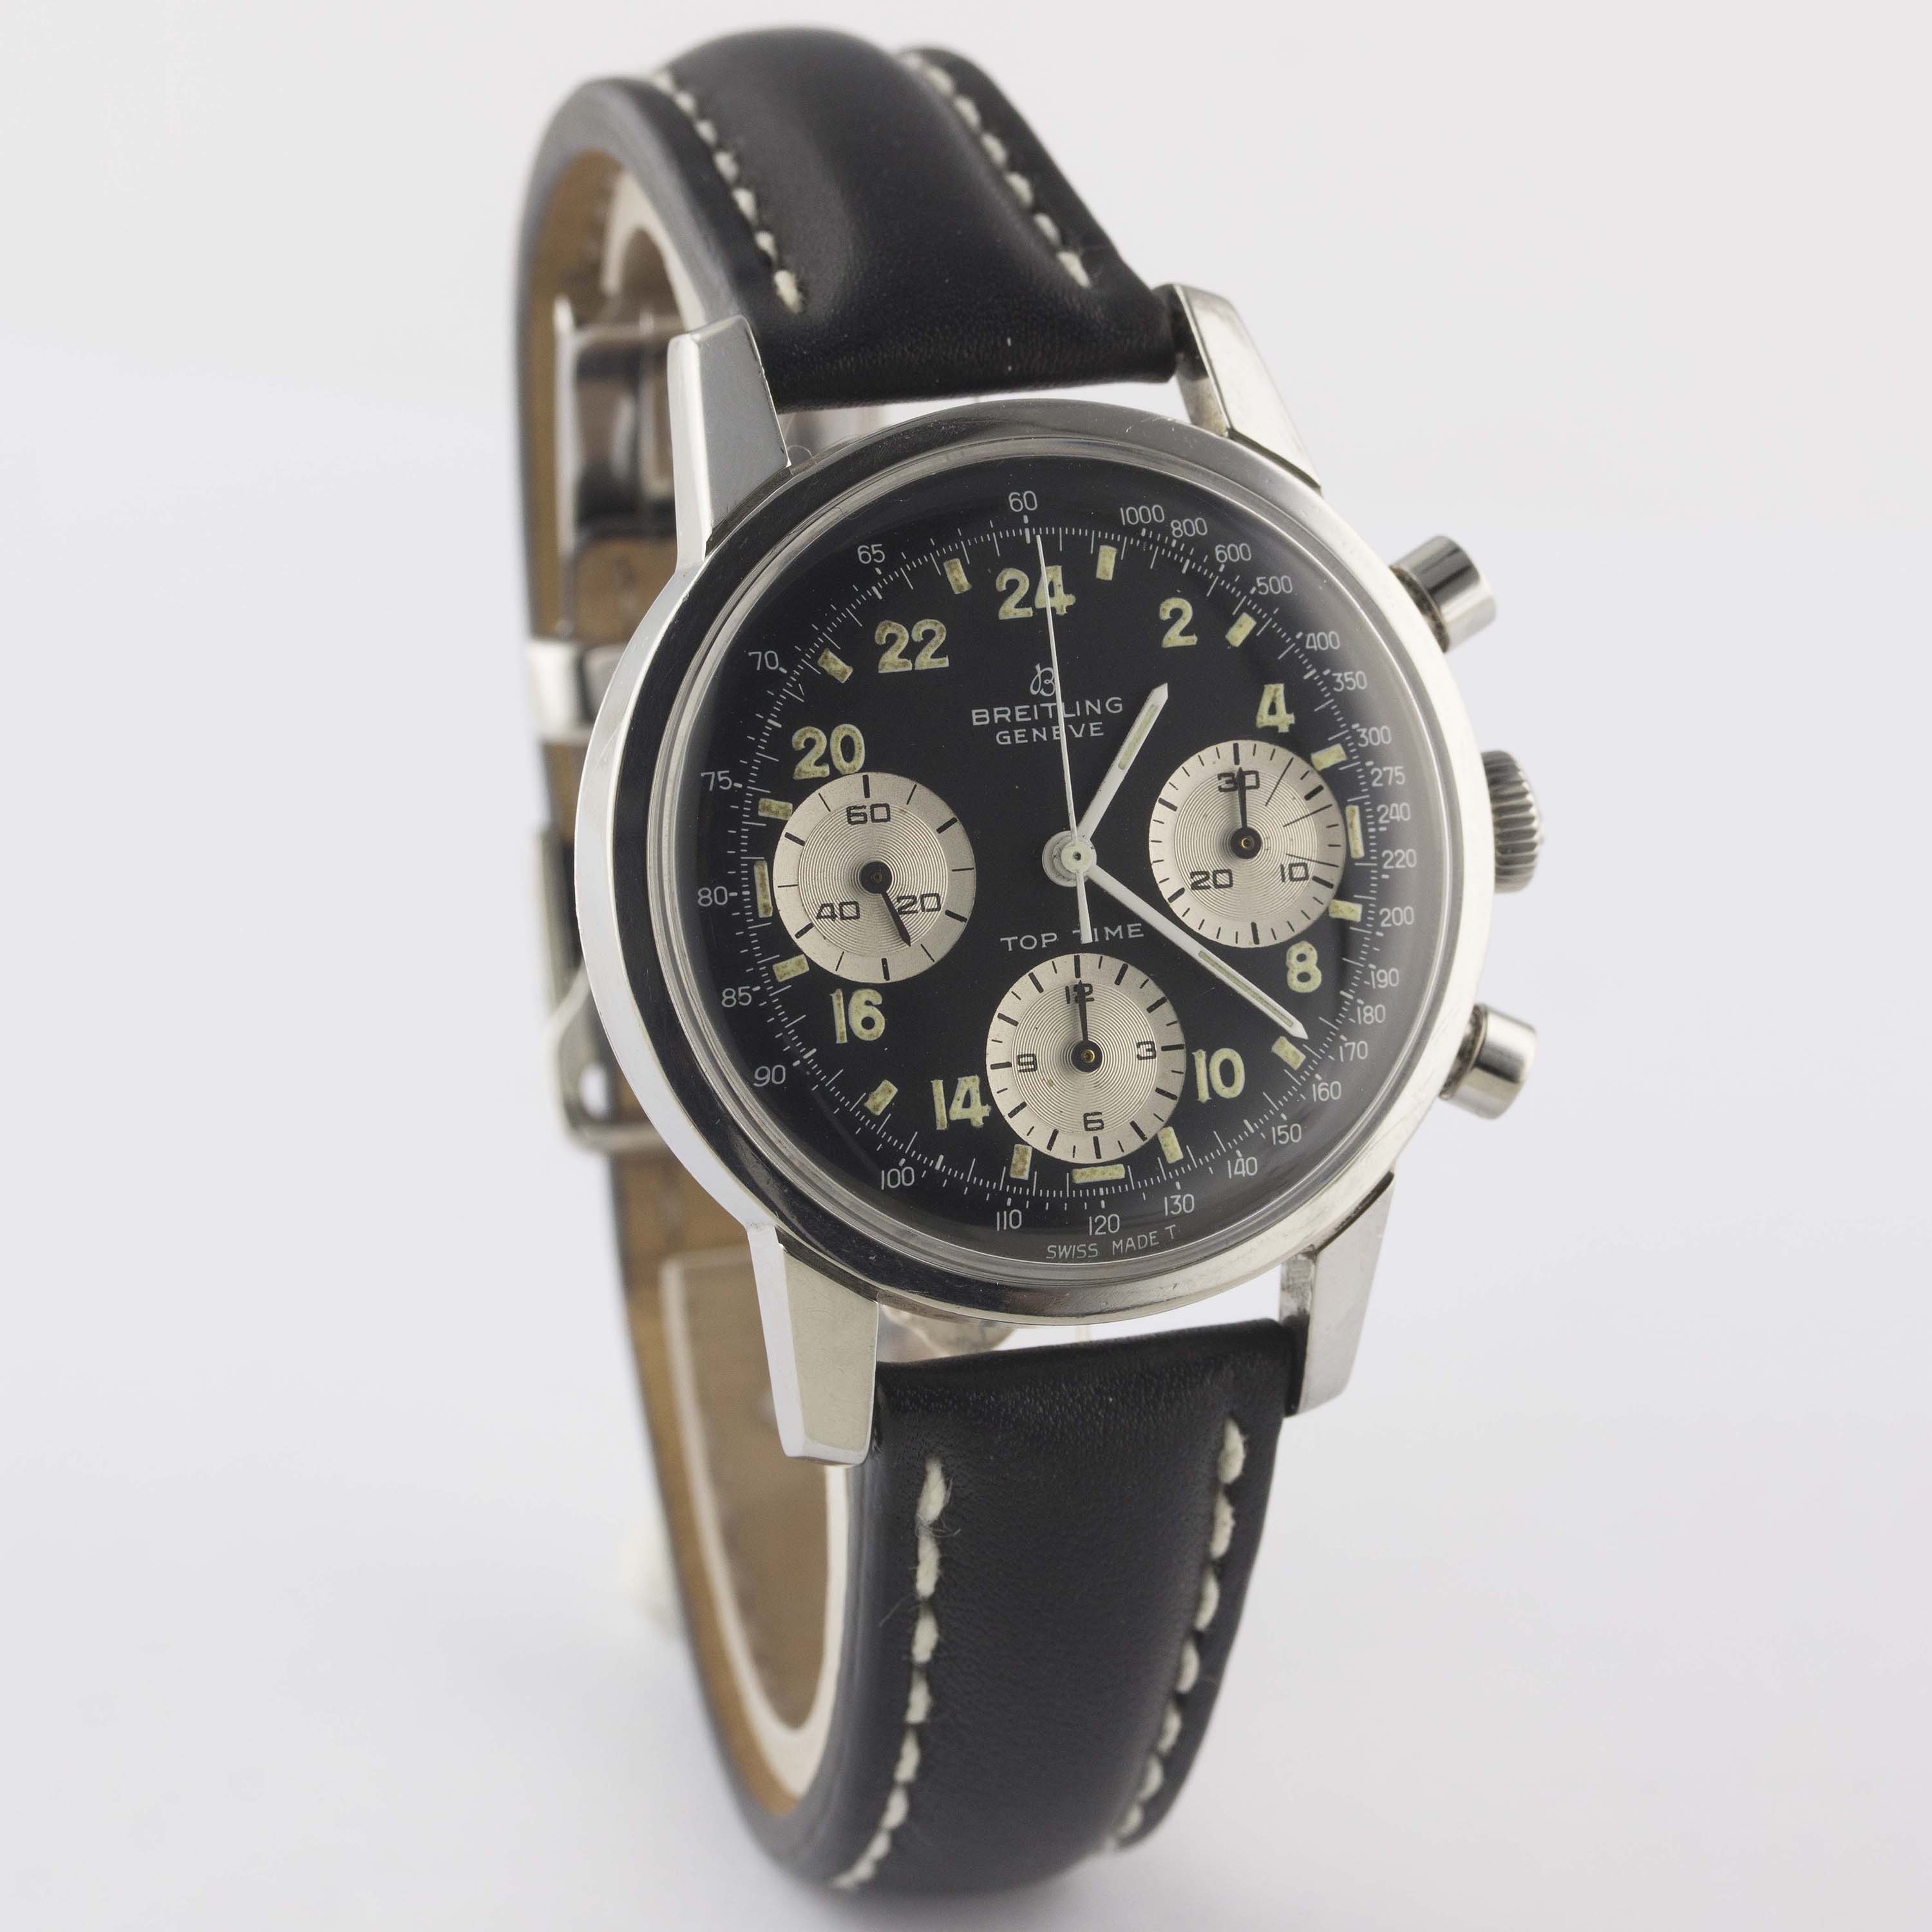 A RARE GENTLEMAN'S STAINLESS STEEL BREITLING TOP TIME 24 HOUR CHRONOGRAPH WRIST WATCH CIRCA 1968, - Image 6 of 12